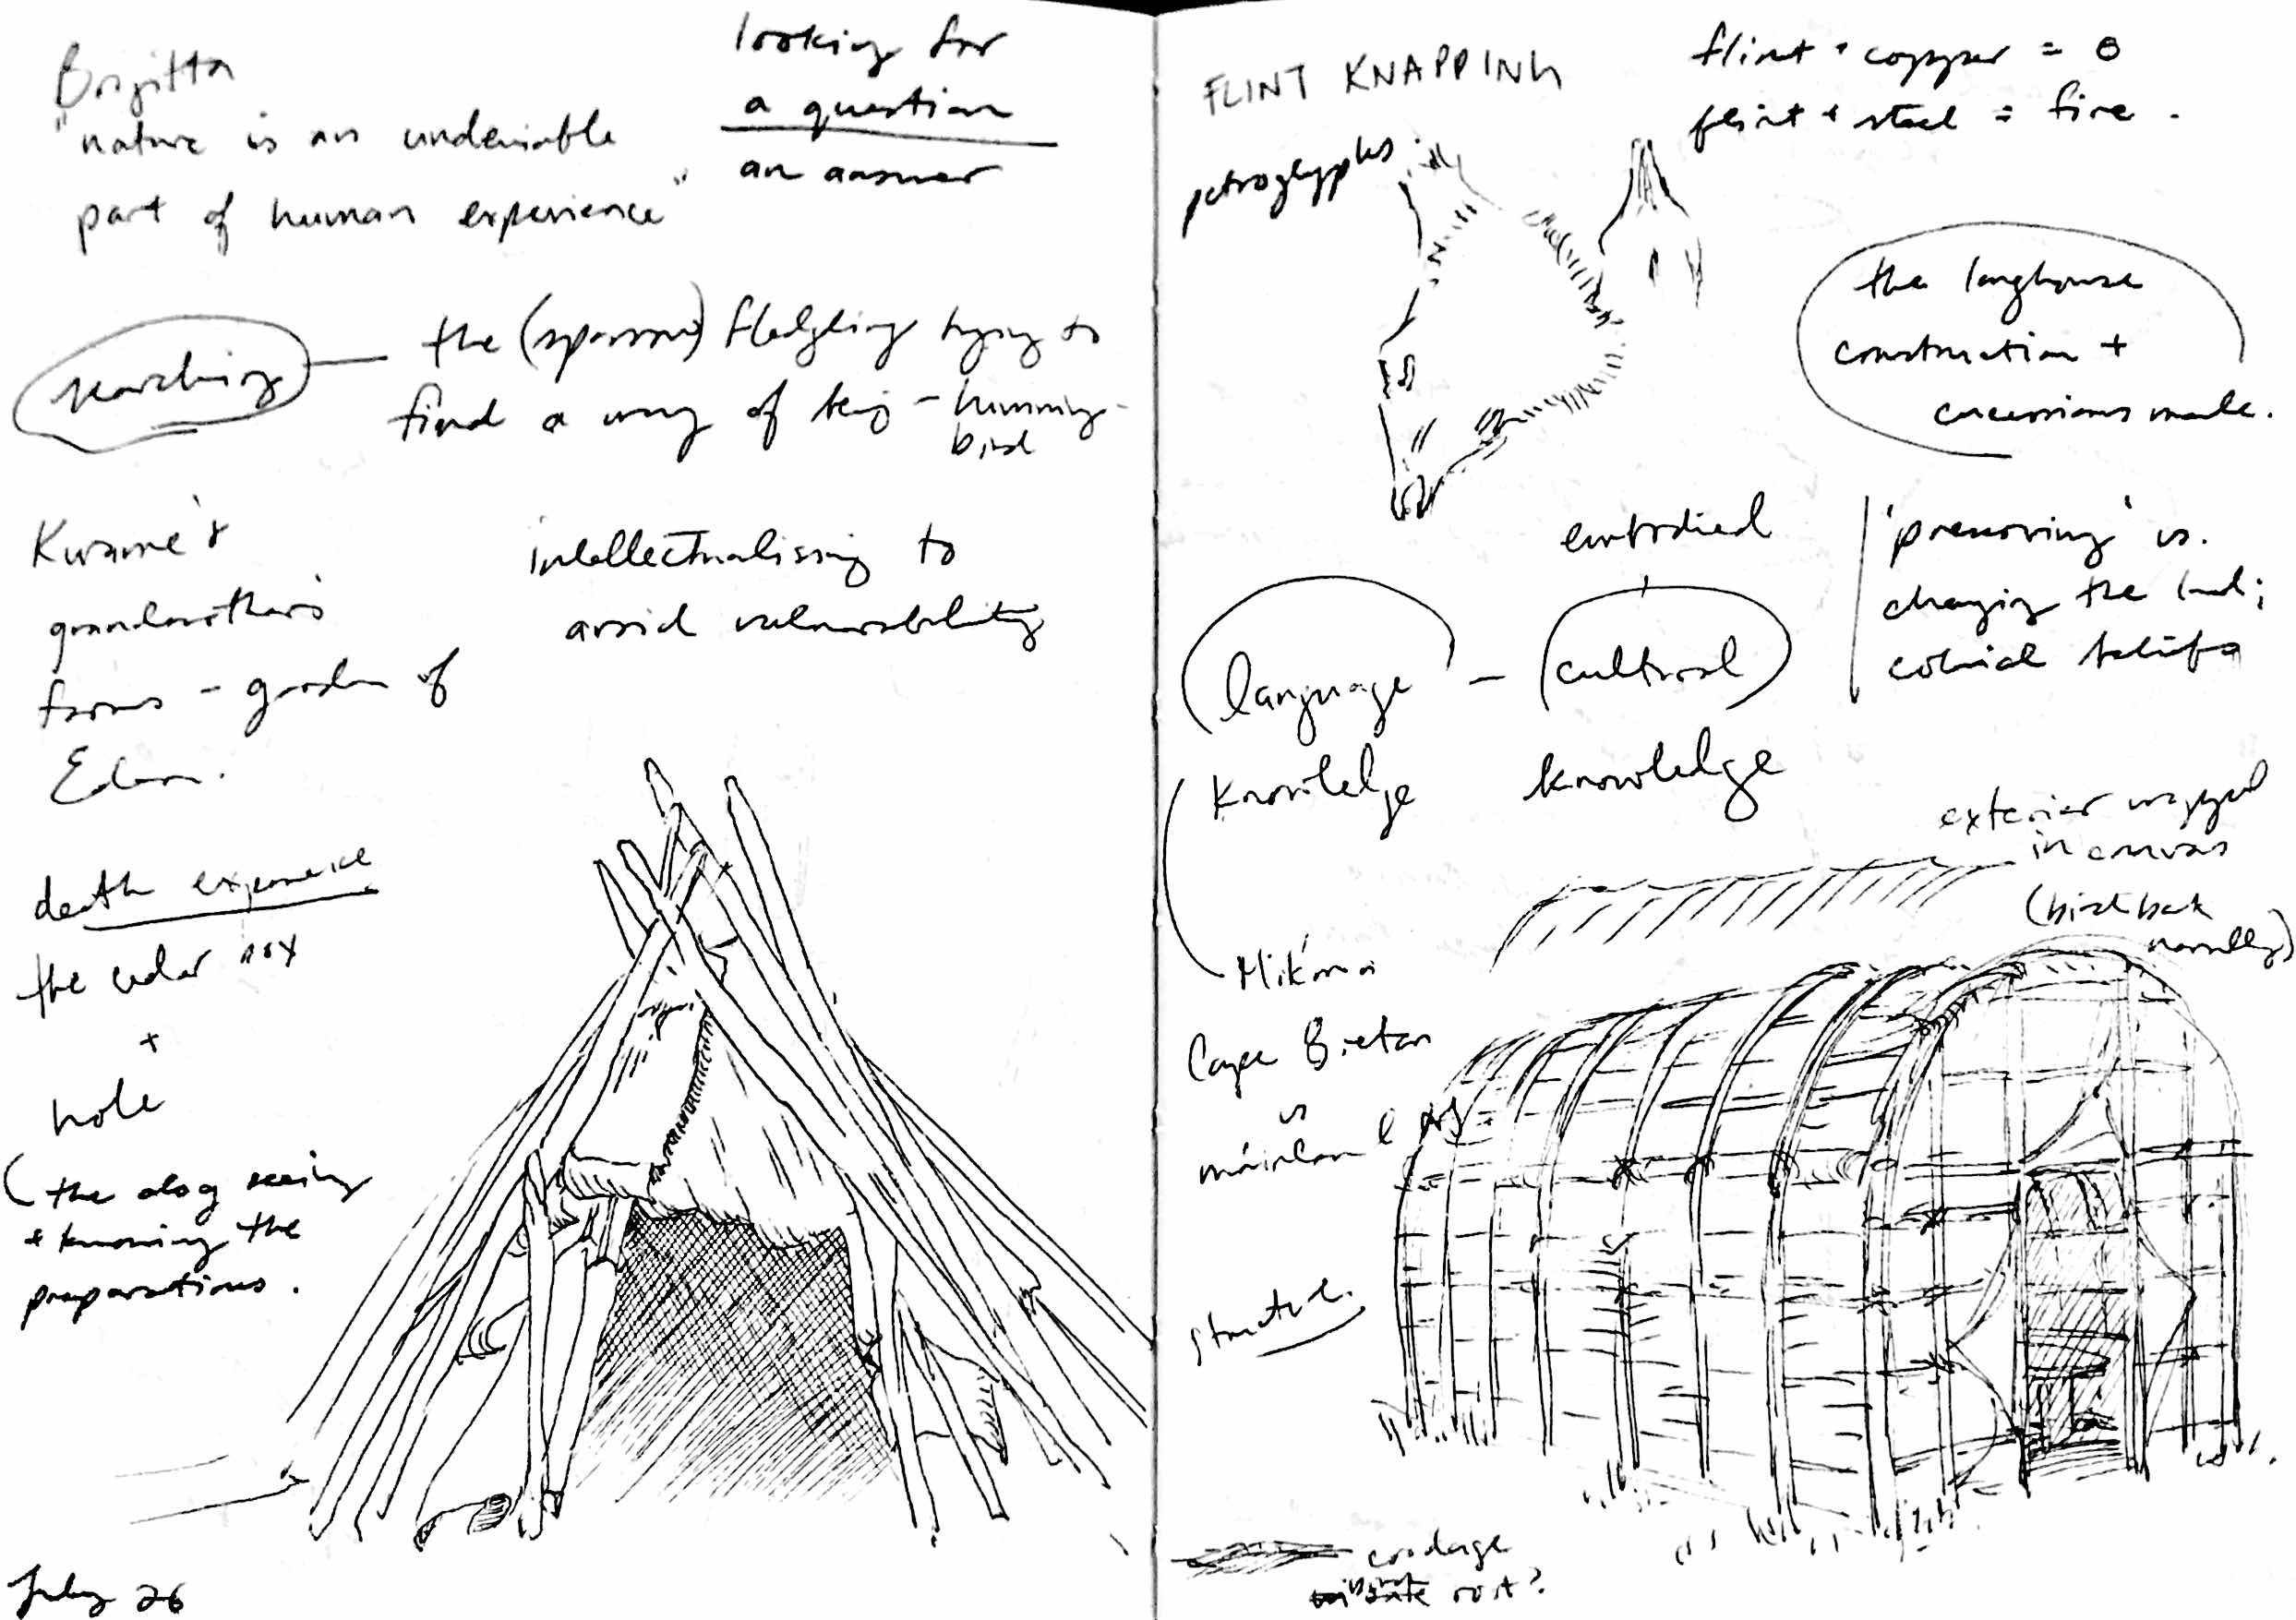 sketchbook page with a drawing of a wigwam and the longhouse at Keji